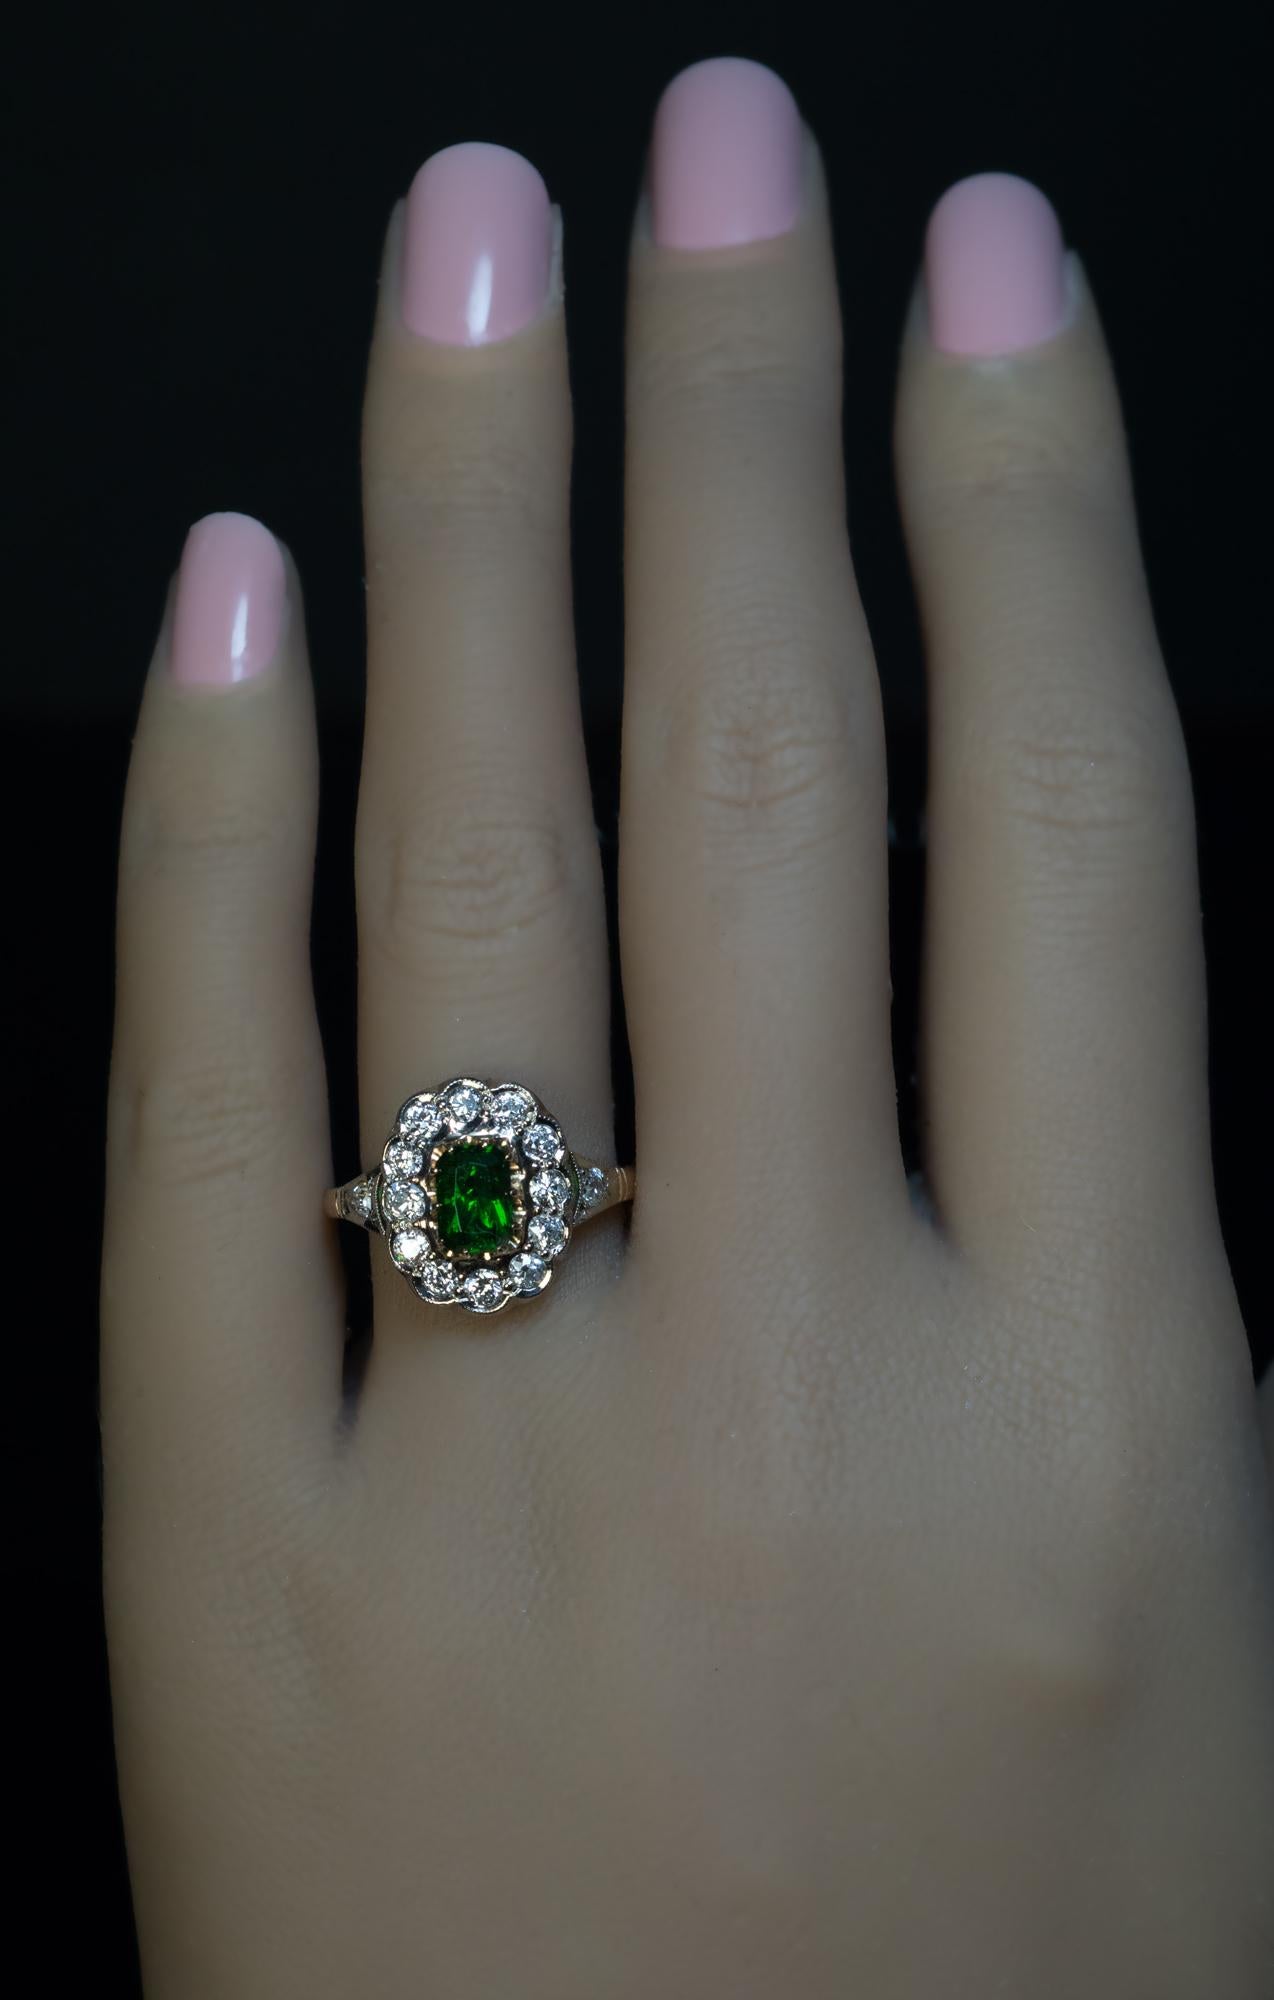 This vintage Russian cluster ring from the 1930s is crafted in white and yellow 14K gold. The ring features a modified emerald cut Russian demantoid from the Ural Mountains of a rare saturated alpine green color. The demantoid measures 6.9 x 4.7 x